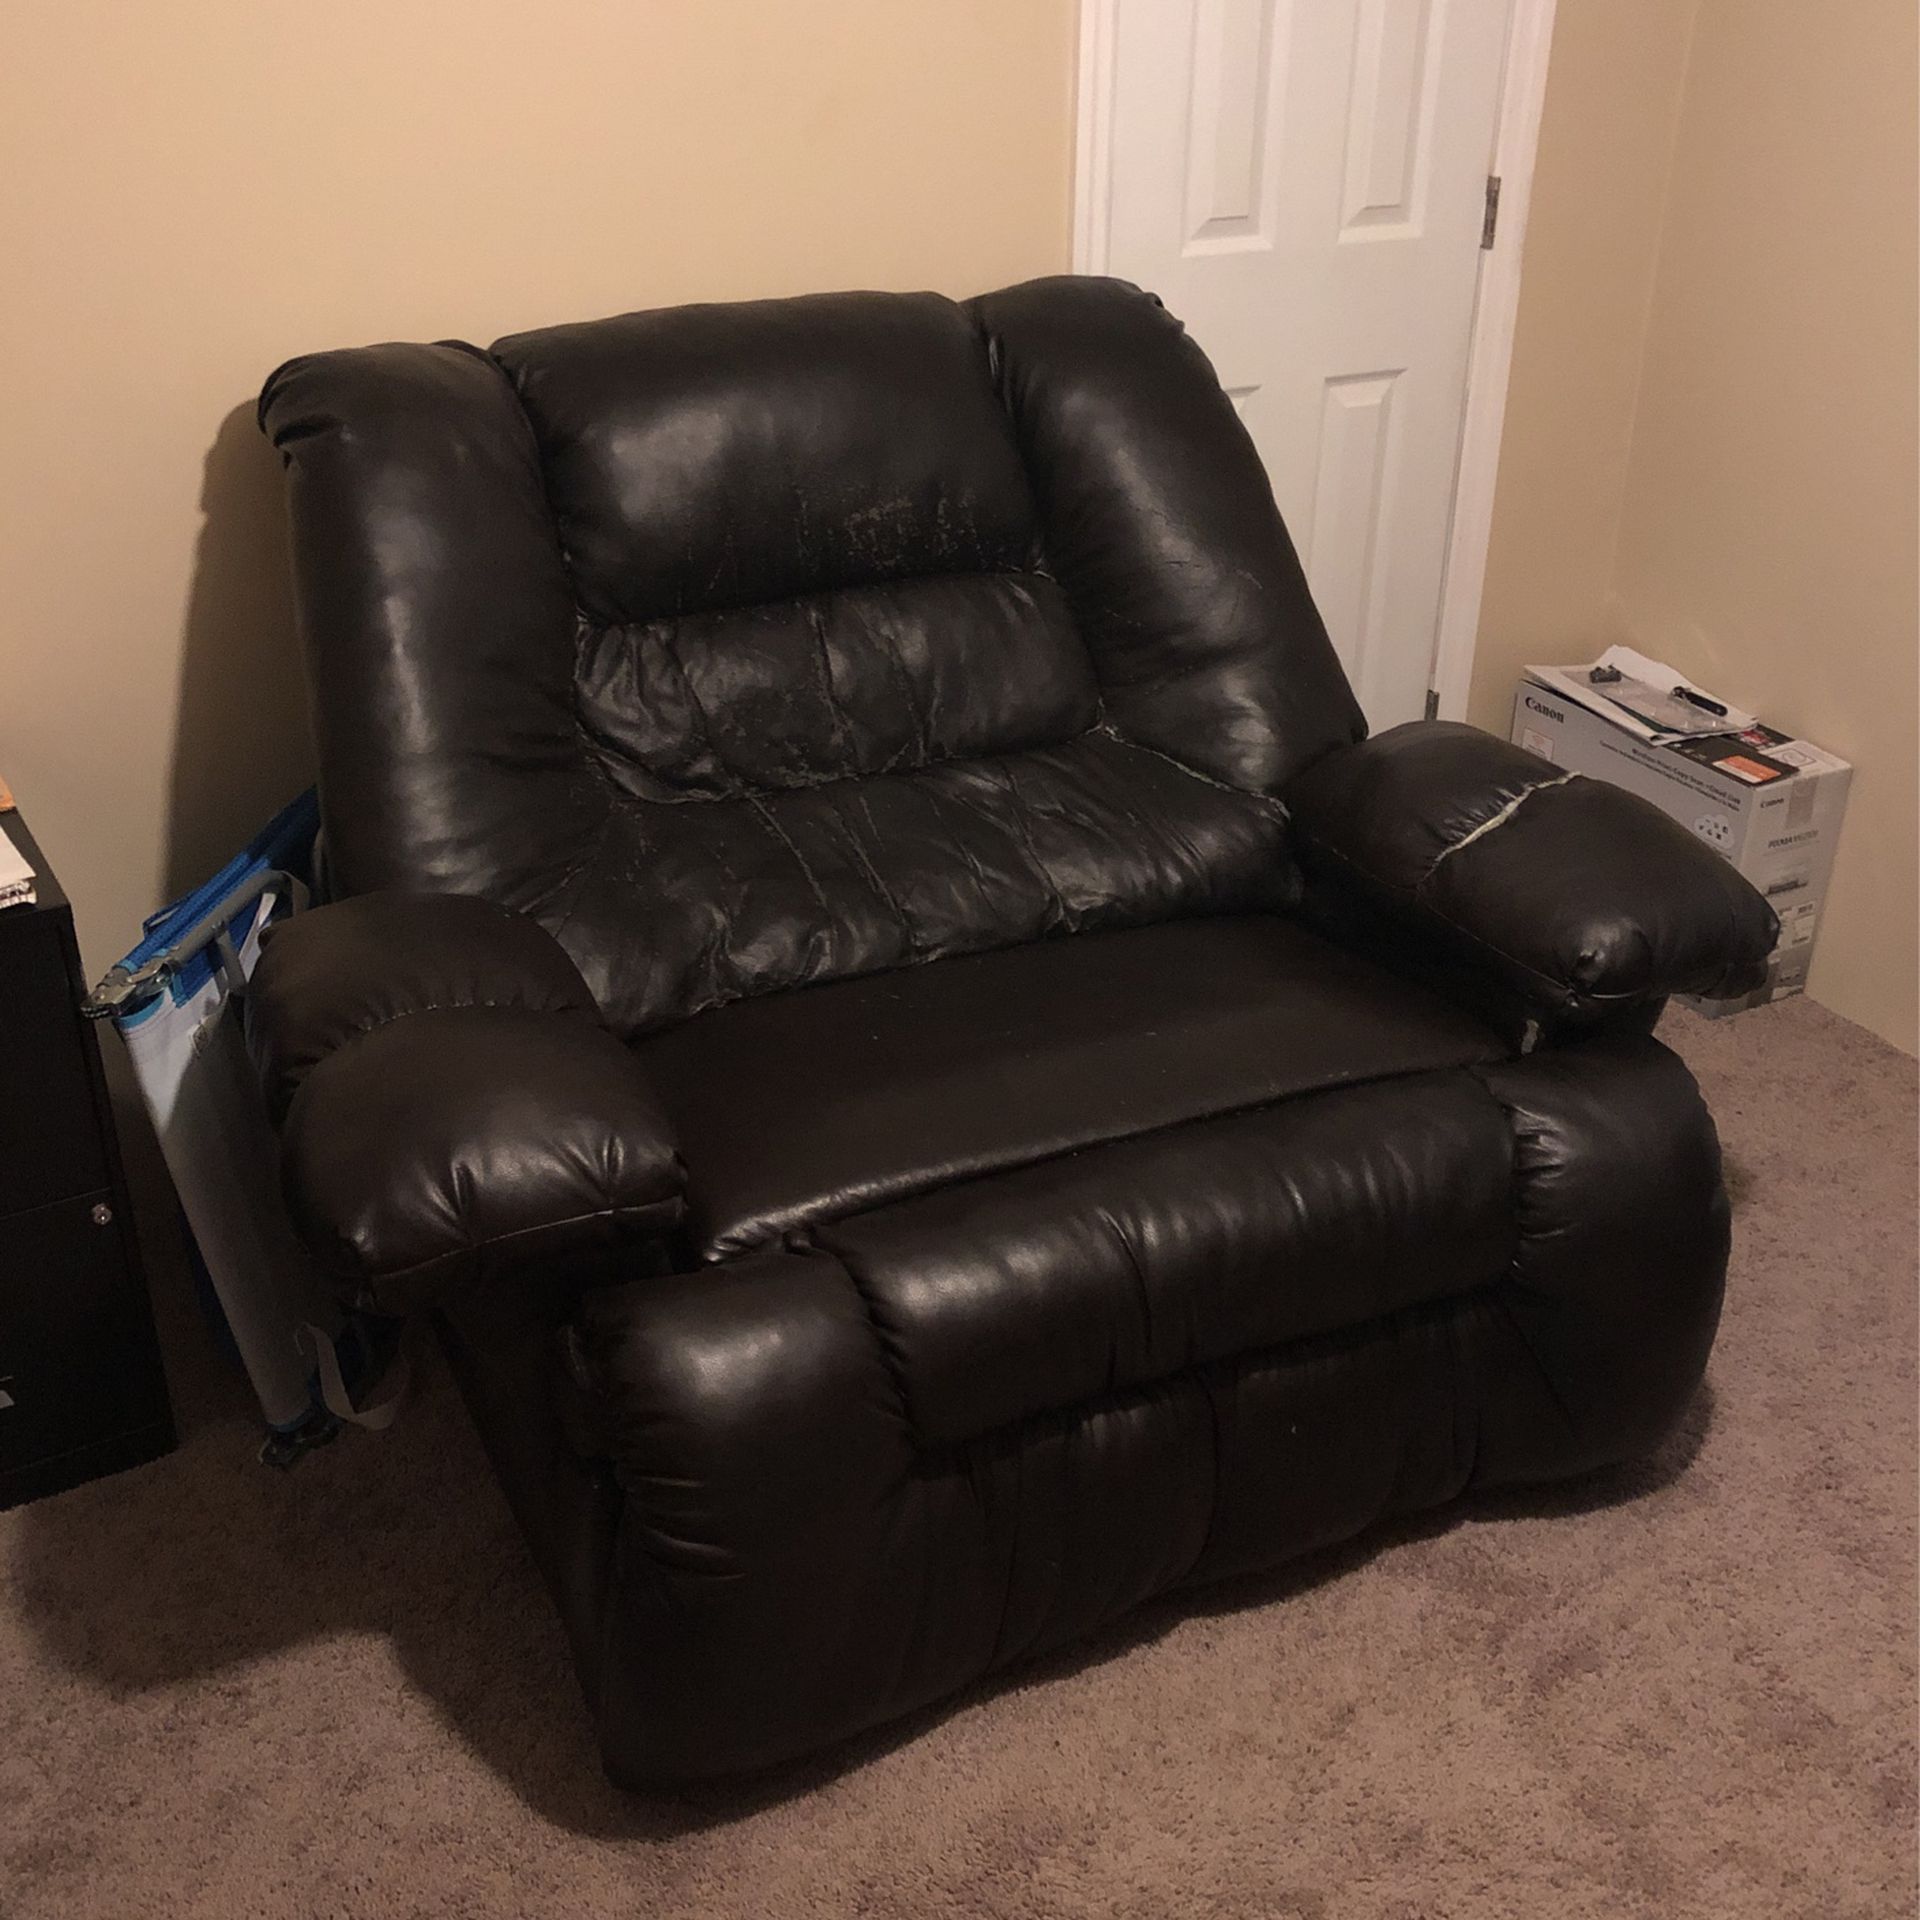 Free Cuddle Sized Recliner